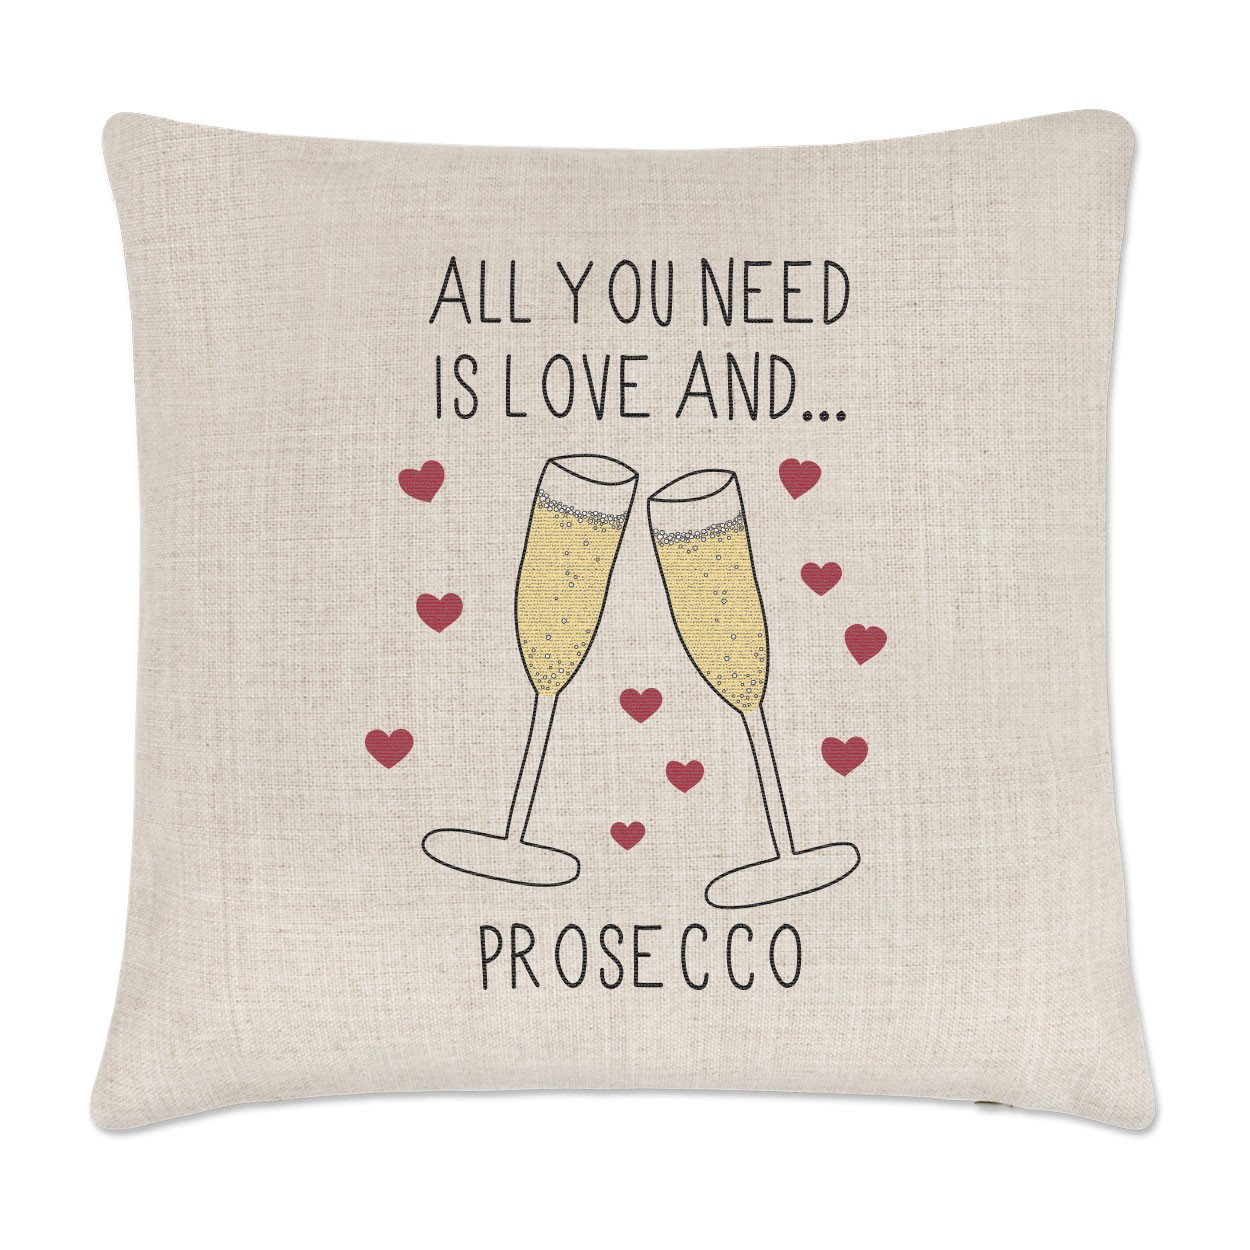 All You Need Is Love And Prosecco Linen Cushion Cover